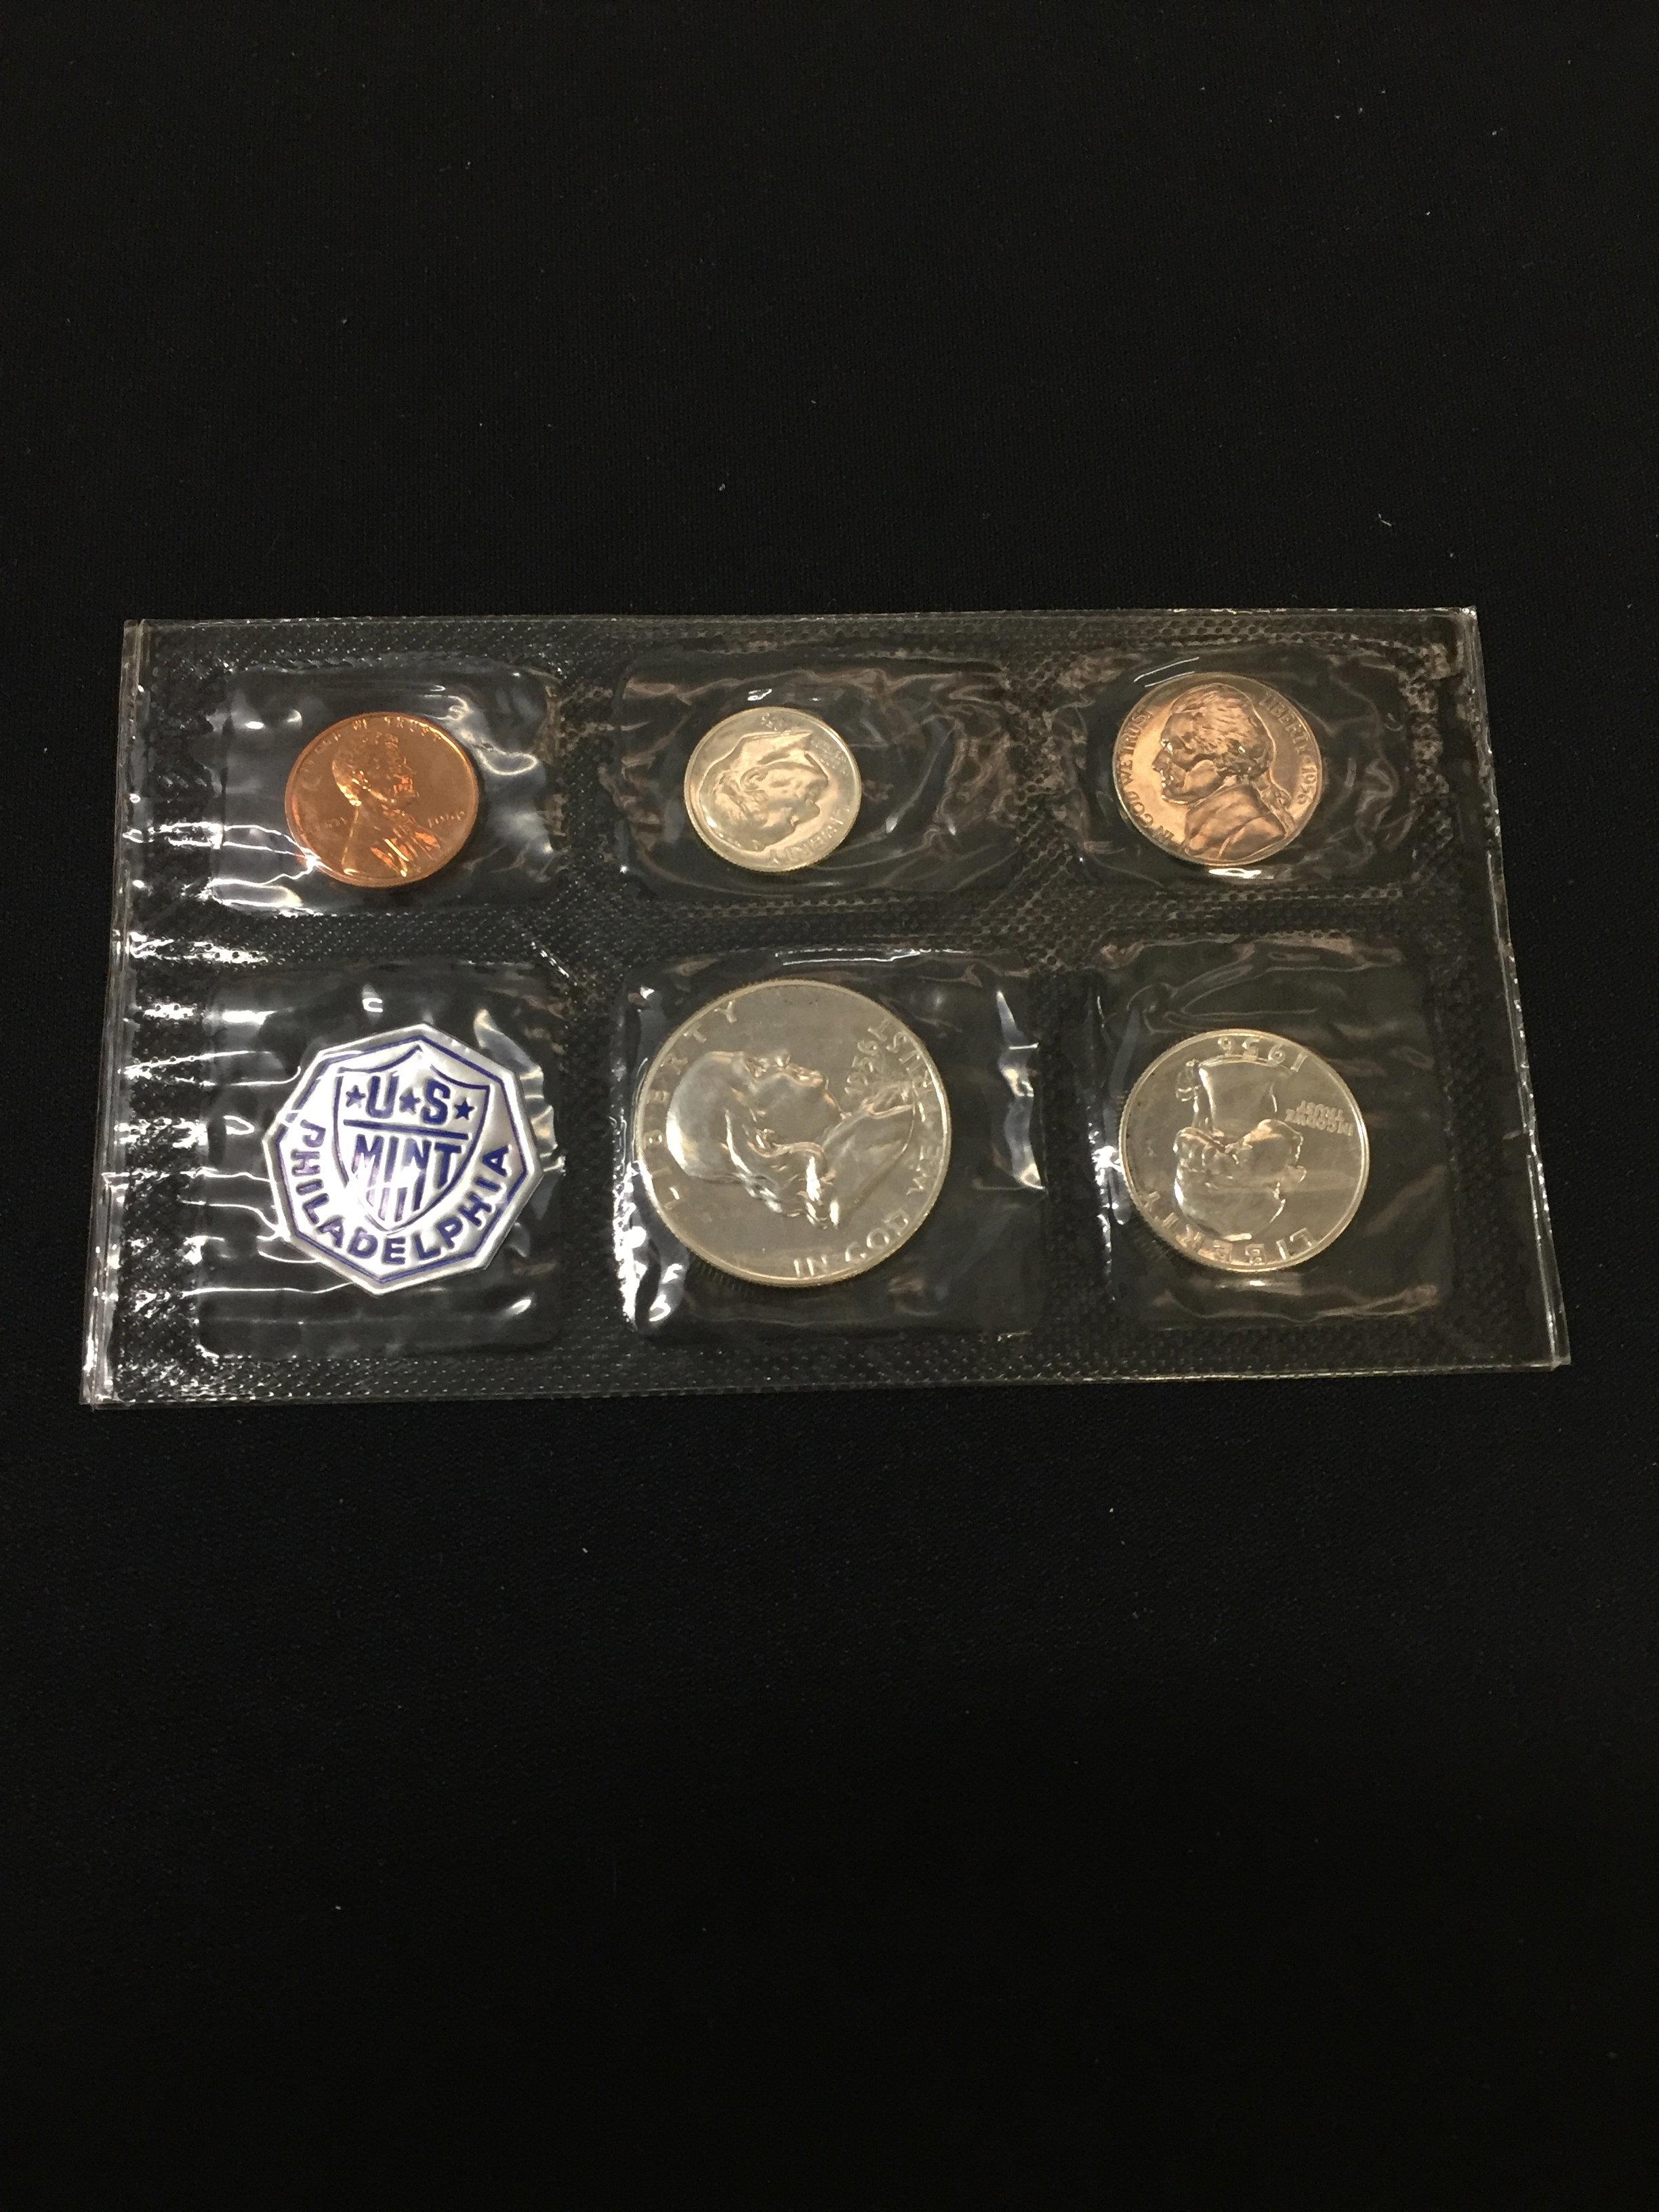 1956 United States Mint Proof Silver Coin Set - RARE